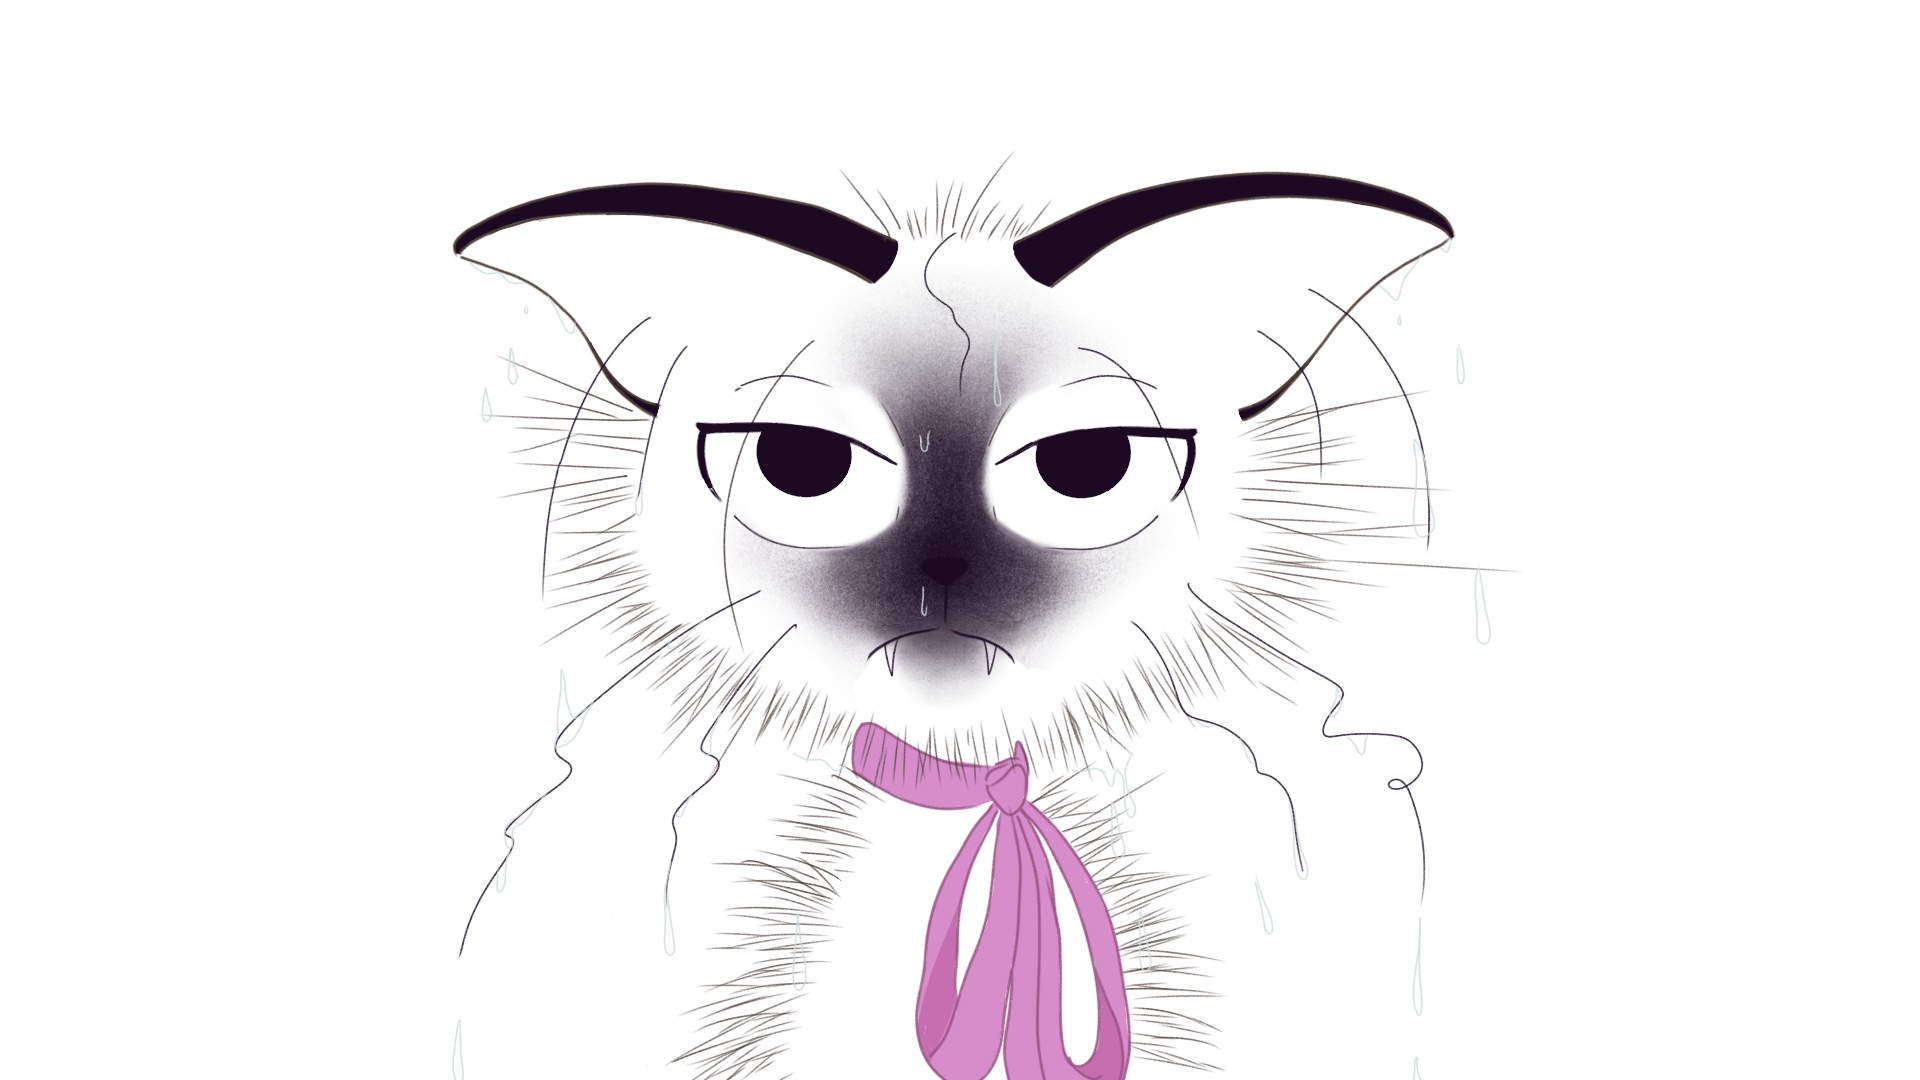 Illustration of wet Siamese cat looking aggrieved